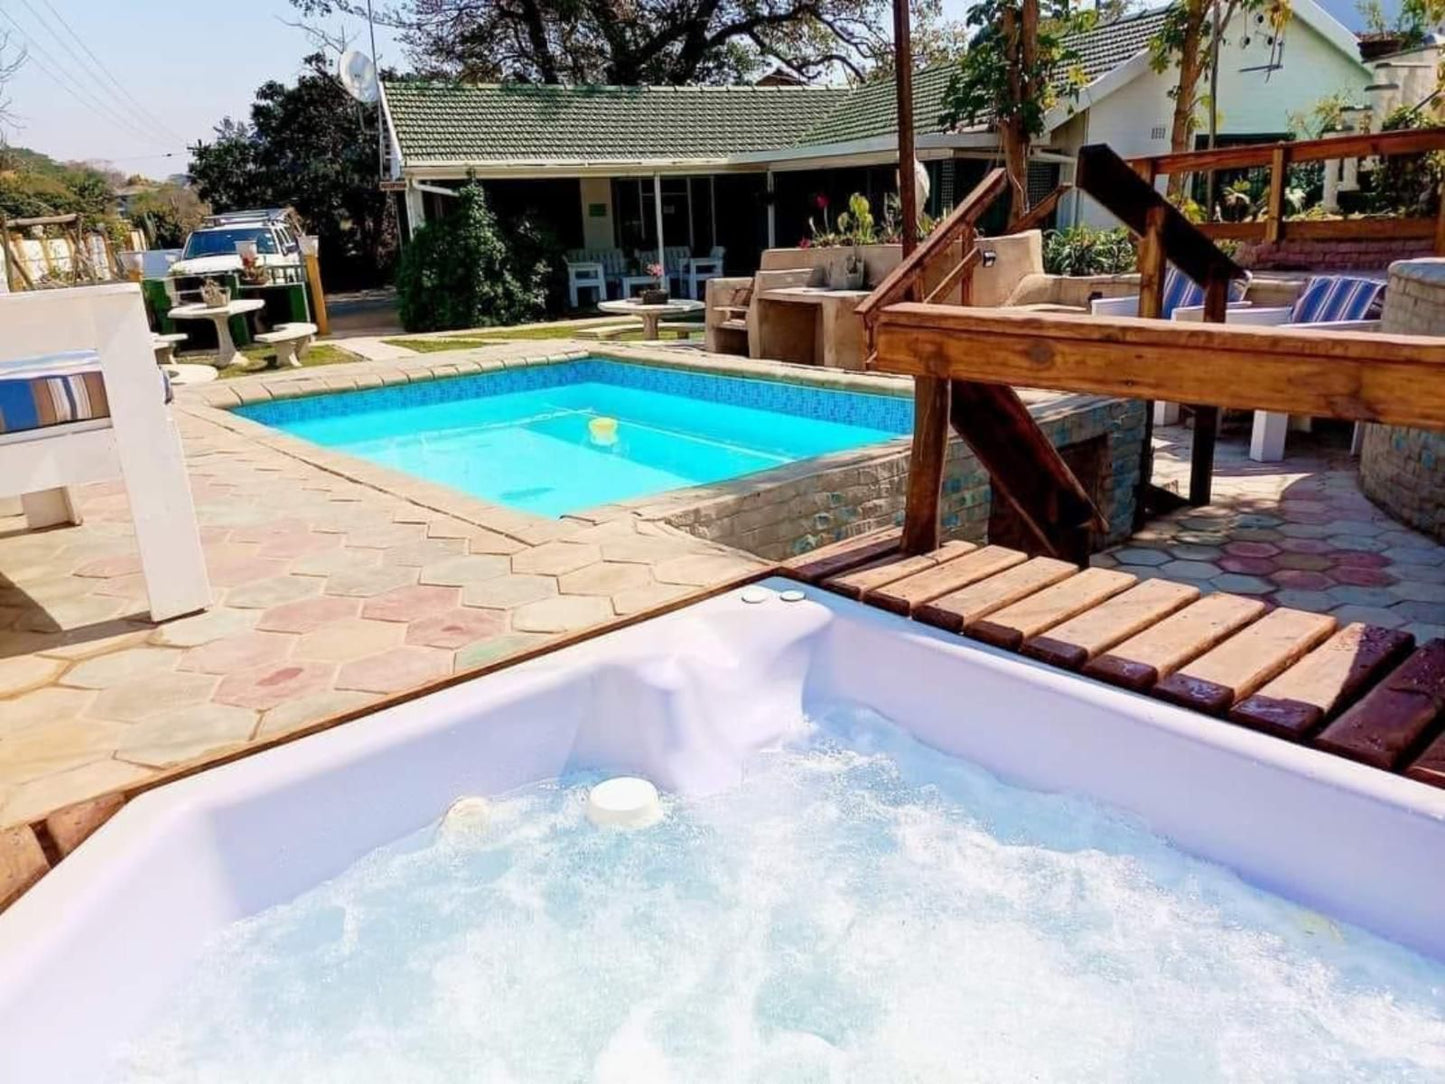 Queensburgh Bed And Breakfast Or Self Catering Queensburgh Durban Kwazulu Natal South Africa Complementary Colors, Swimming Pool